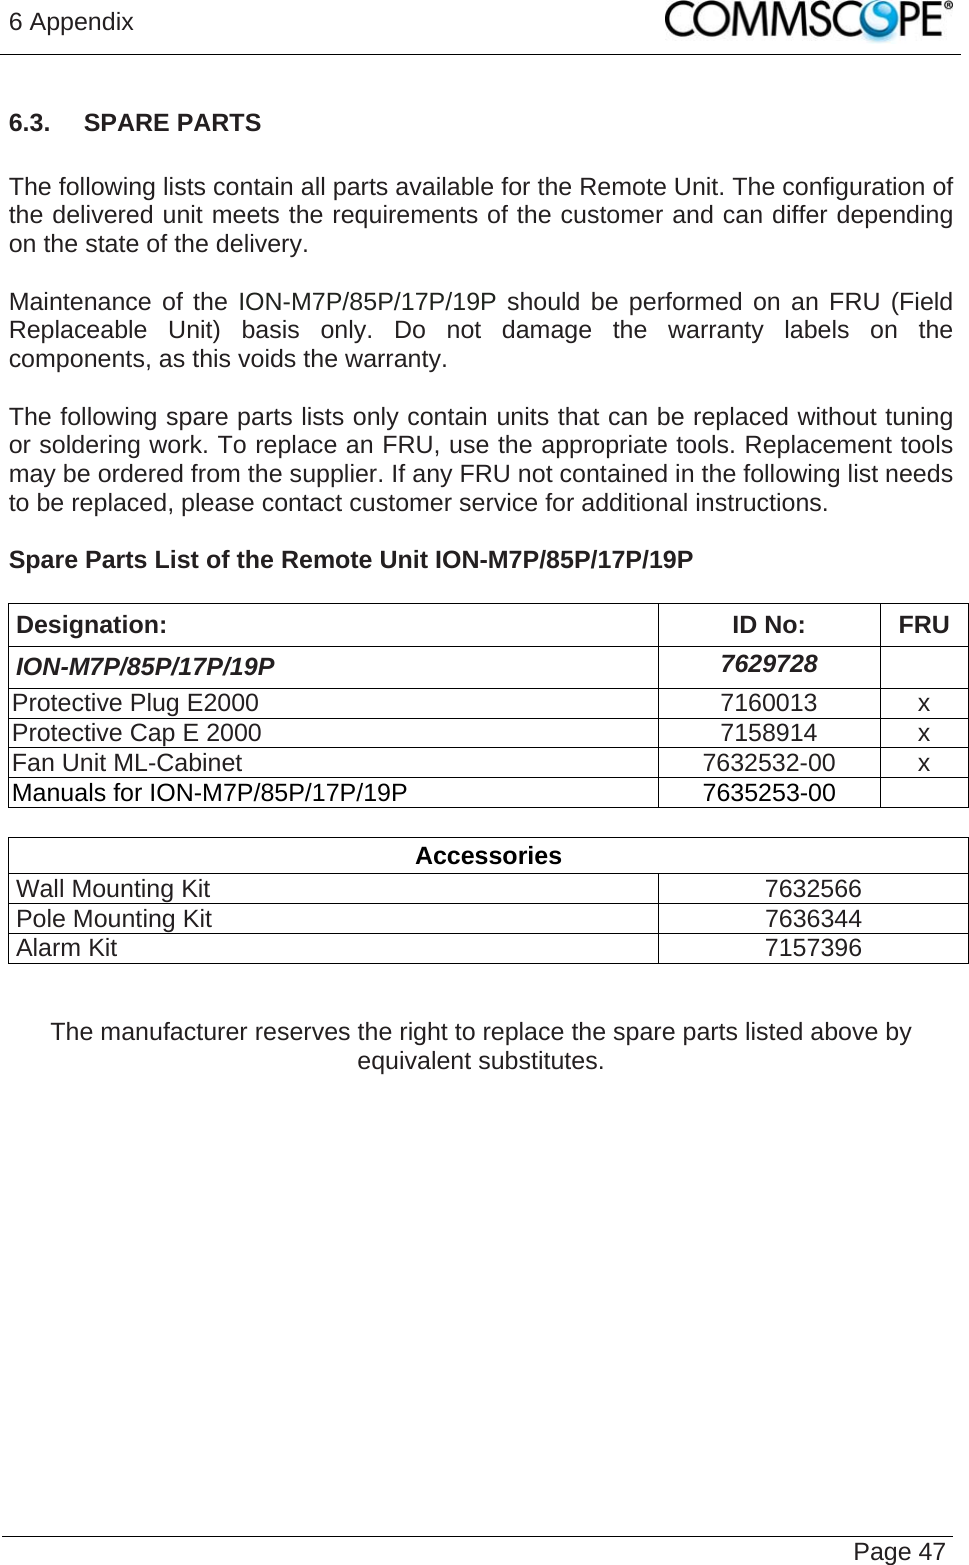 6 Appendix   Page 47 6.3.  SPARE PARTS  The following lists contain all parts available for the Remote Unit. The configuration of the delivered unit meets the requirements of the customer and can differ depending on the state of the delivery.  Maintenance of the ION-M7P/85P/17P/19P should be performed on an FRU (Field Replaceable Unit) basis only. Do not damage the warranty labels on the components, as this voids the warranty.   The following spare parts lists only contain units that can be replaced without tuning or soldering work. To replace an FRU, use the appropriate tools. Replacement tools may be ordered from the supplier. If any FRU not contained in the following list needs to be replaced, please contact customer service for additional instructions.  Spare Parts List of the Remote Unit ION-M7P/85P/17P/19P  Designation: ID No: FRU ION-M7P/85P/17P/19P  7629728  Protective Plug E2000  7160013  x Protective Cap E 2000  7158914  x Fan Unit ML-Cabinet  7632532-00  x Manuals for ION-M7P/85P/17P/19P  7635253-00    Accessories Wall Mounting Kit  7632566 Pole Mounting Kit  7636344 Alarm Kit  7157396  The manufacturer reserves the right to replace the spare parts listed above by equivalent substitutes. 